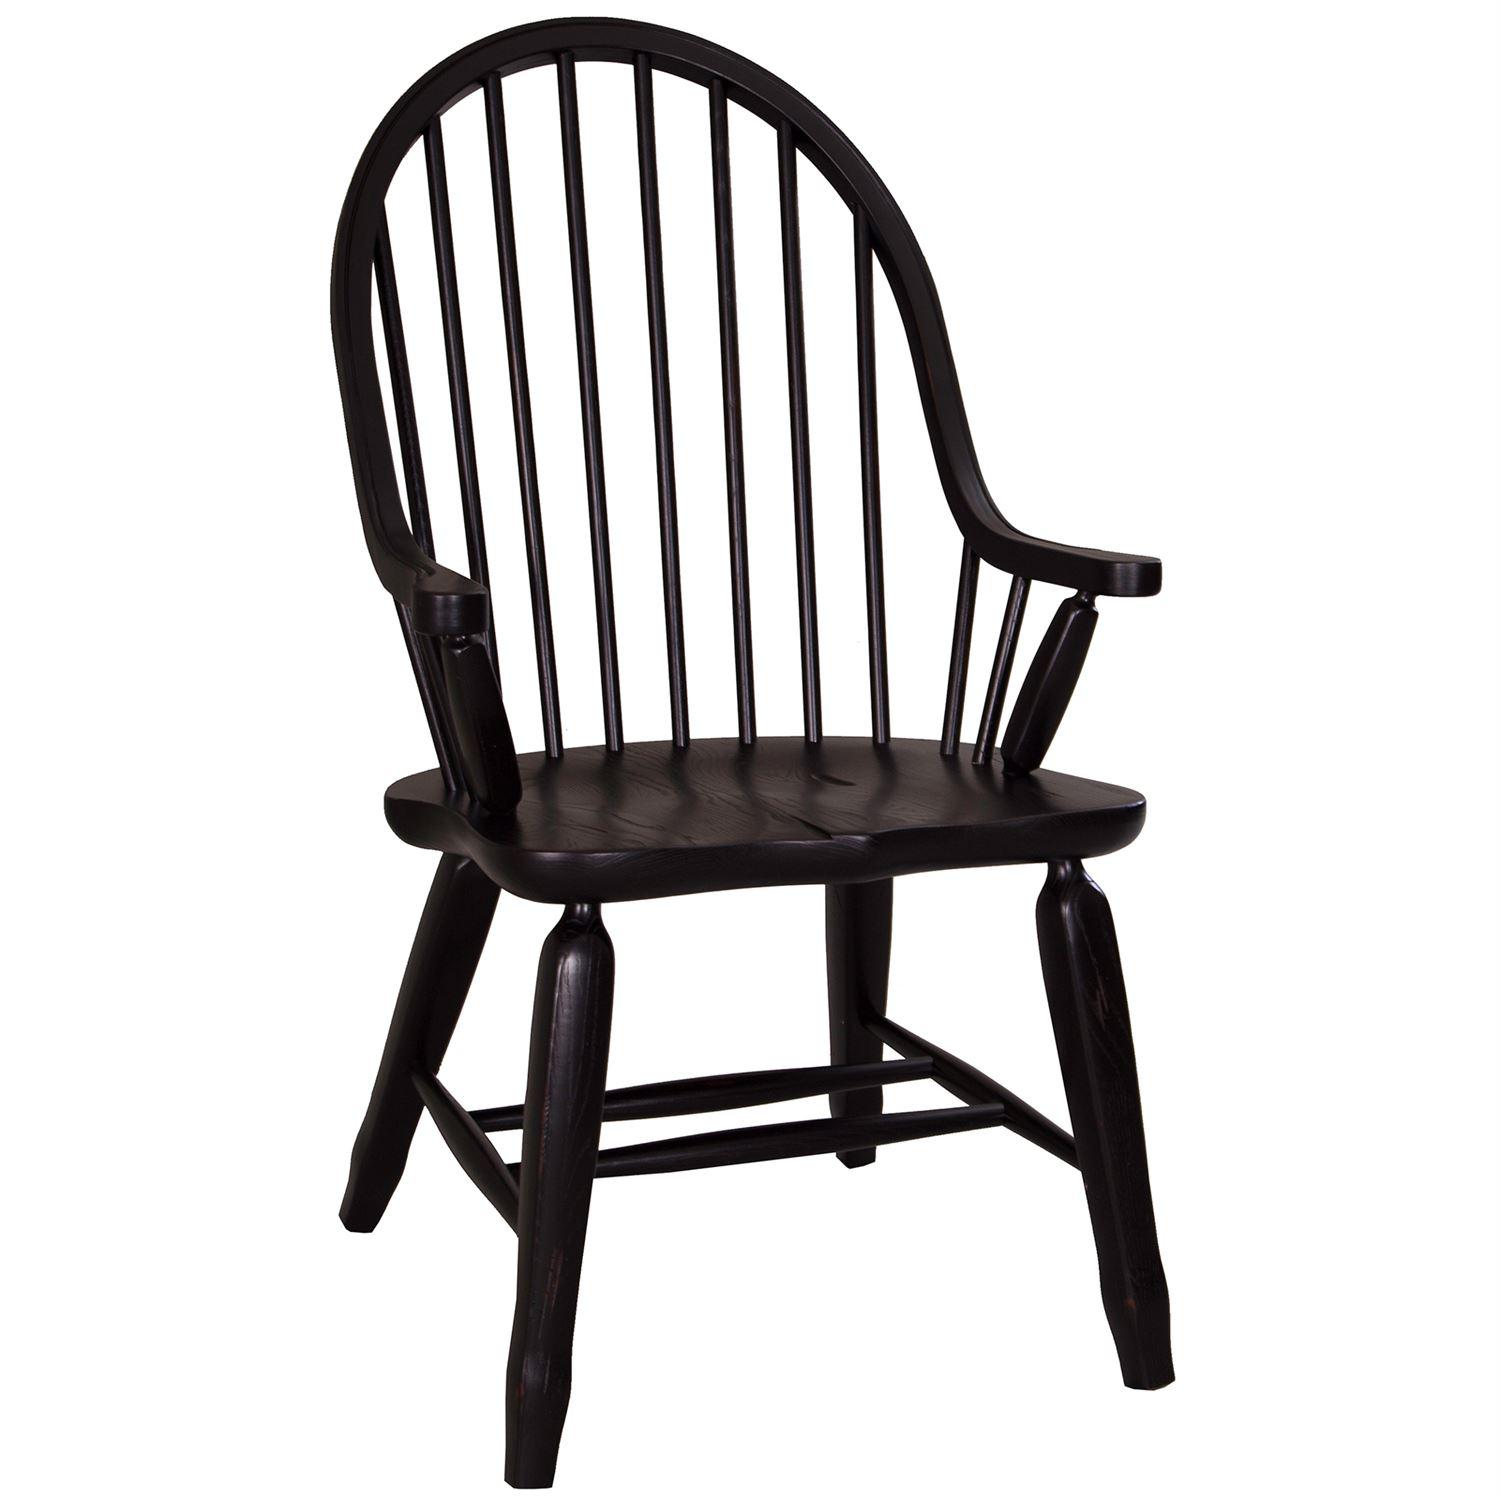 Transitional Dining Arm Chair Treasures  (17-DR) Dining Arm Chair 17-C4051 in Black, Brown Lacquer